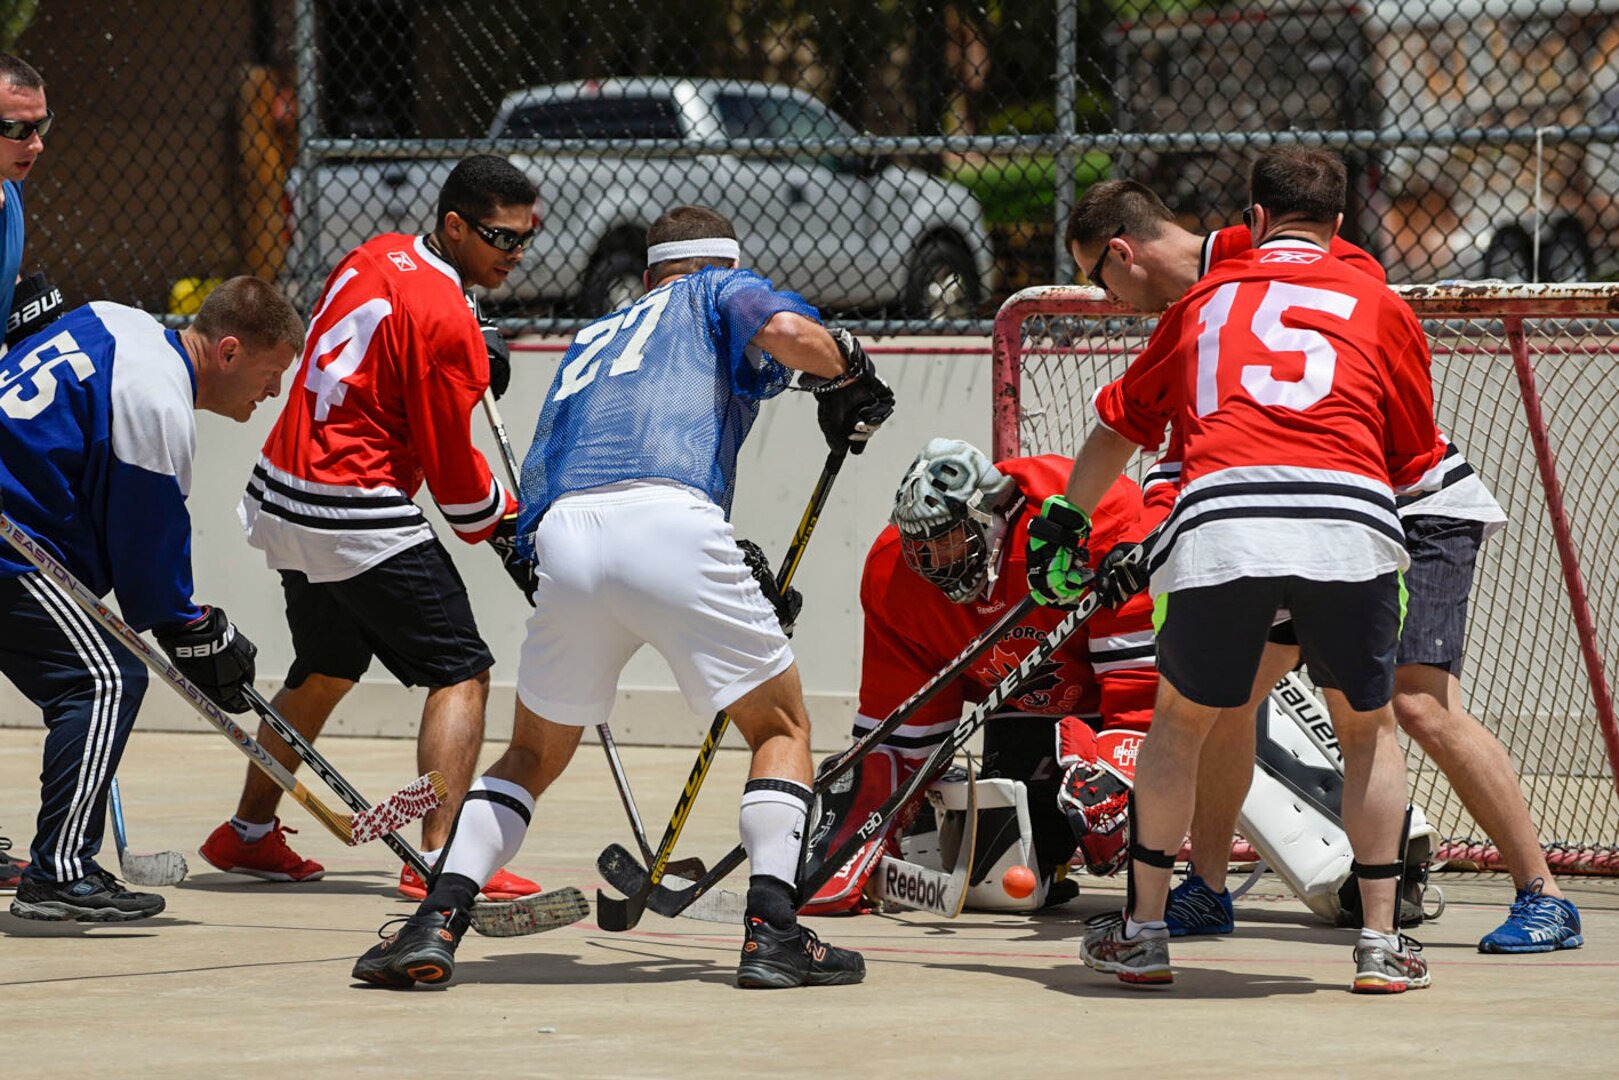 U.S. takes on Canada in 3rd Annual Ball Hockey Tournament > Space Base